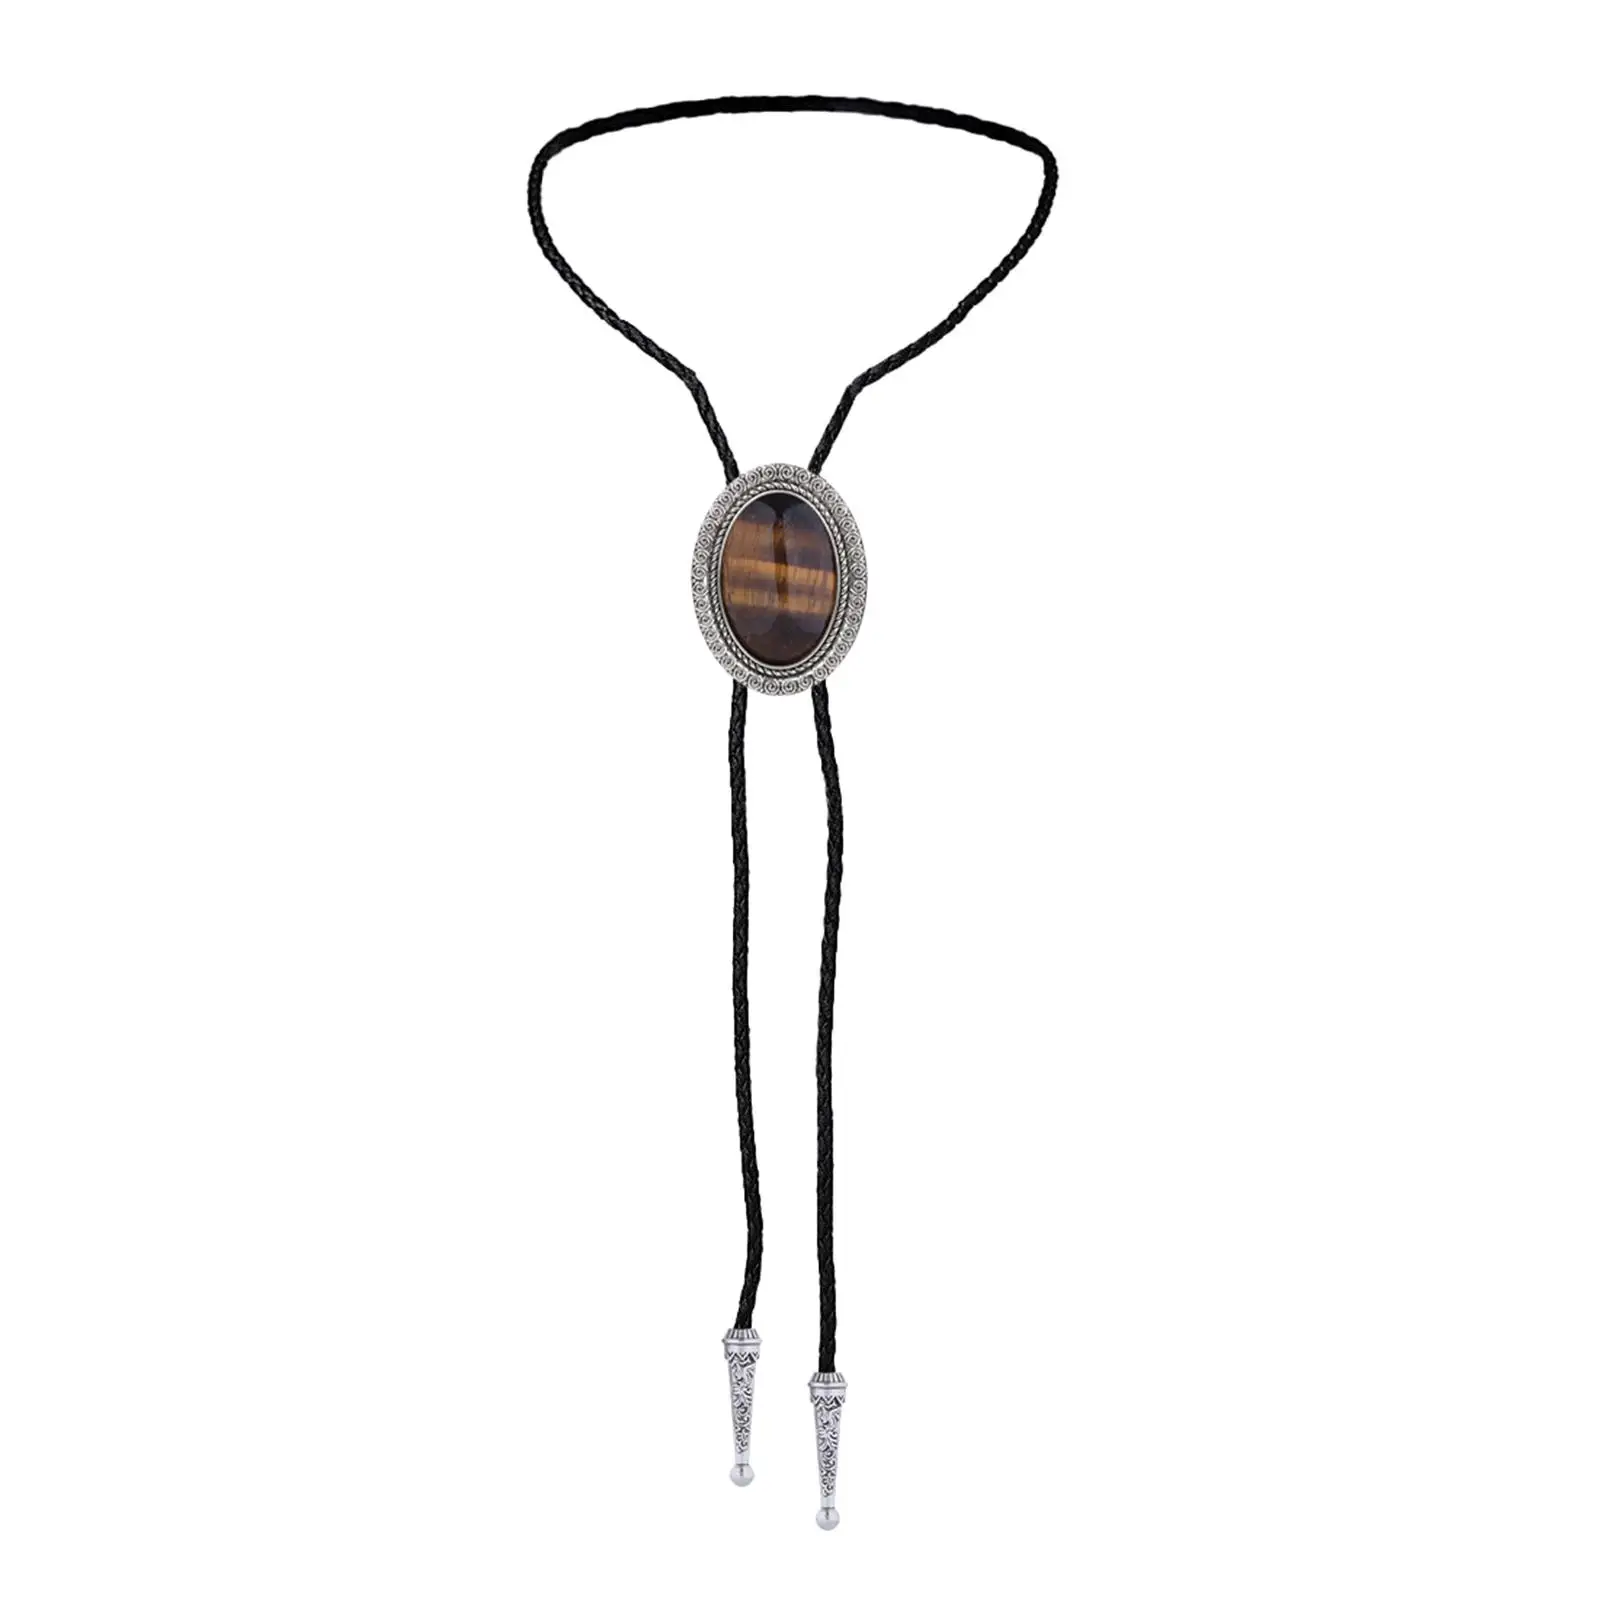 Bolo Tie for Men Women Western Cowboy Shirt Chain PU Leather Rope Adjustable